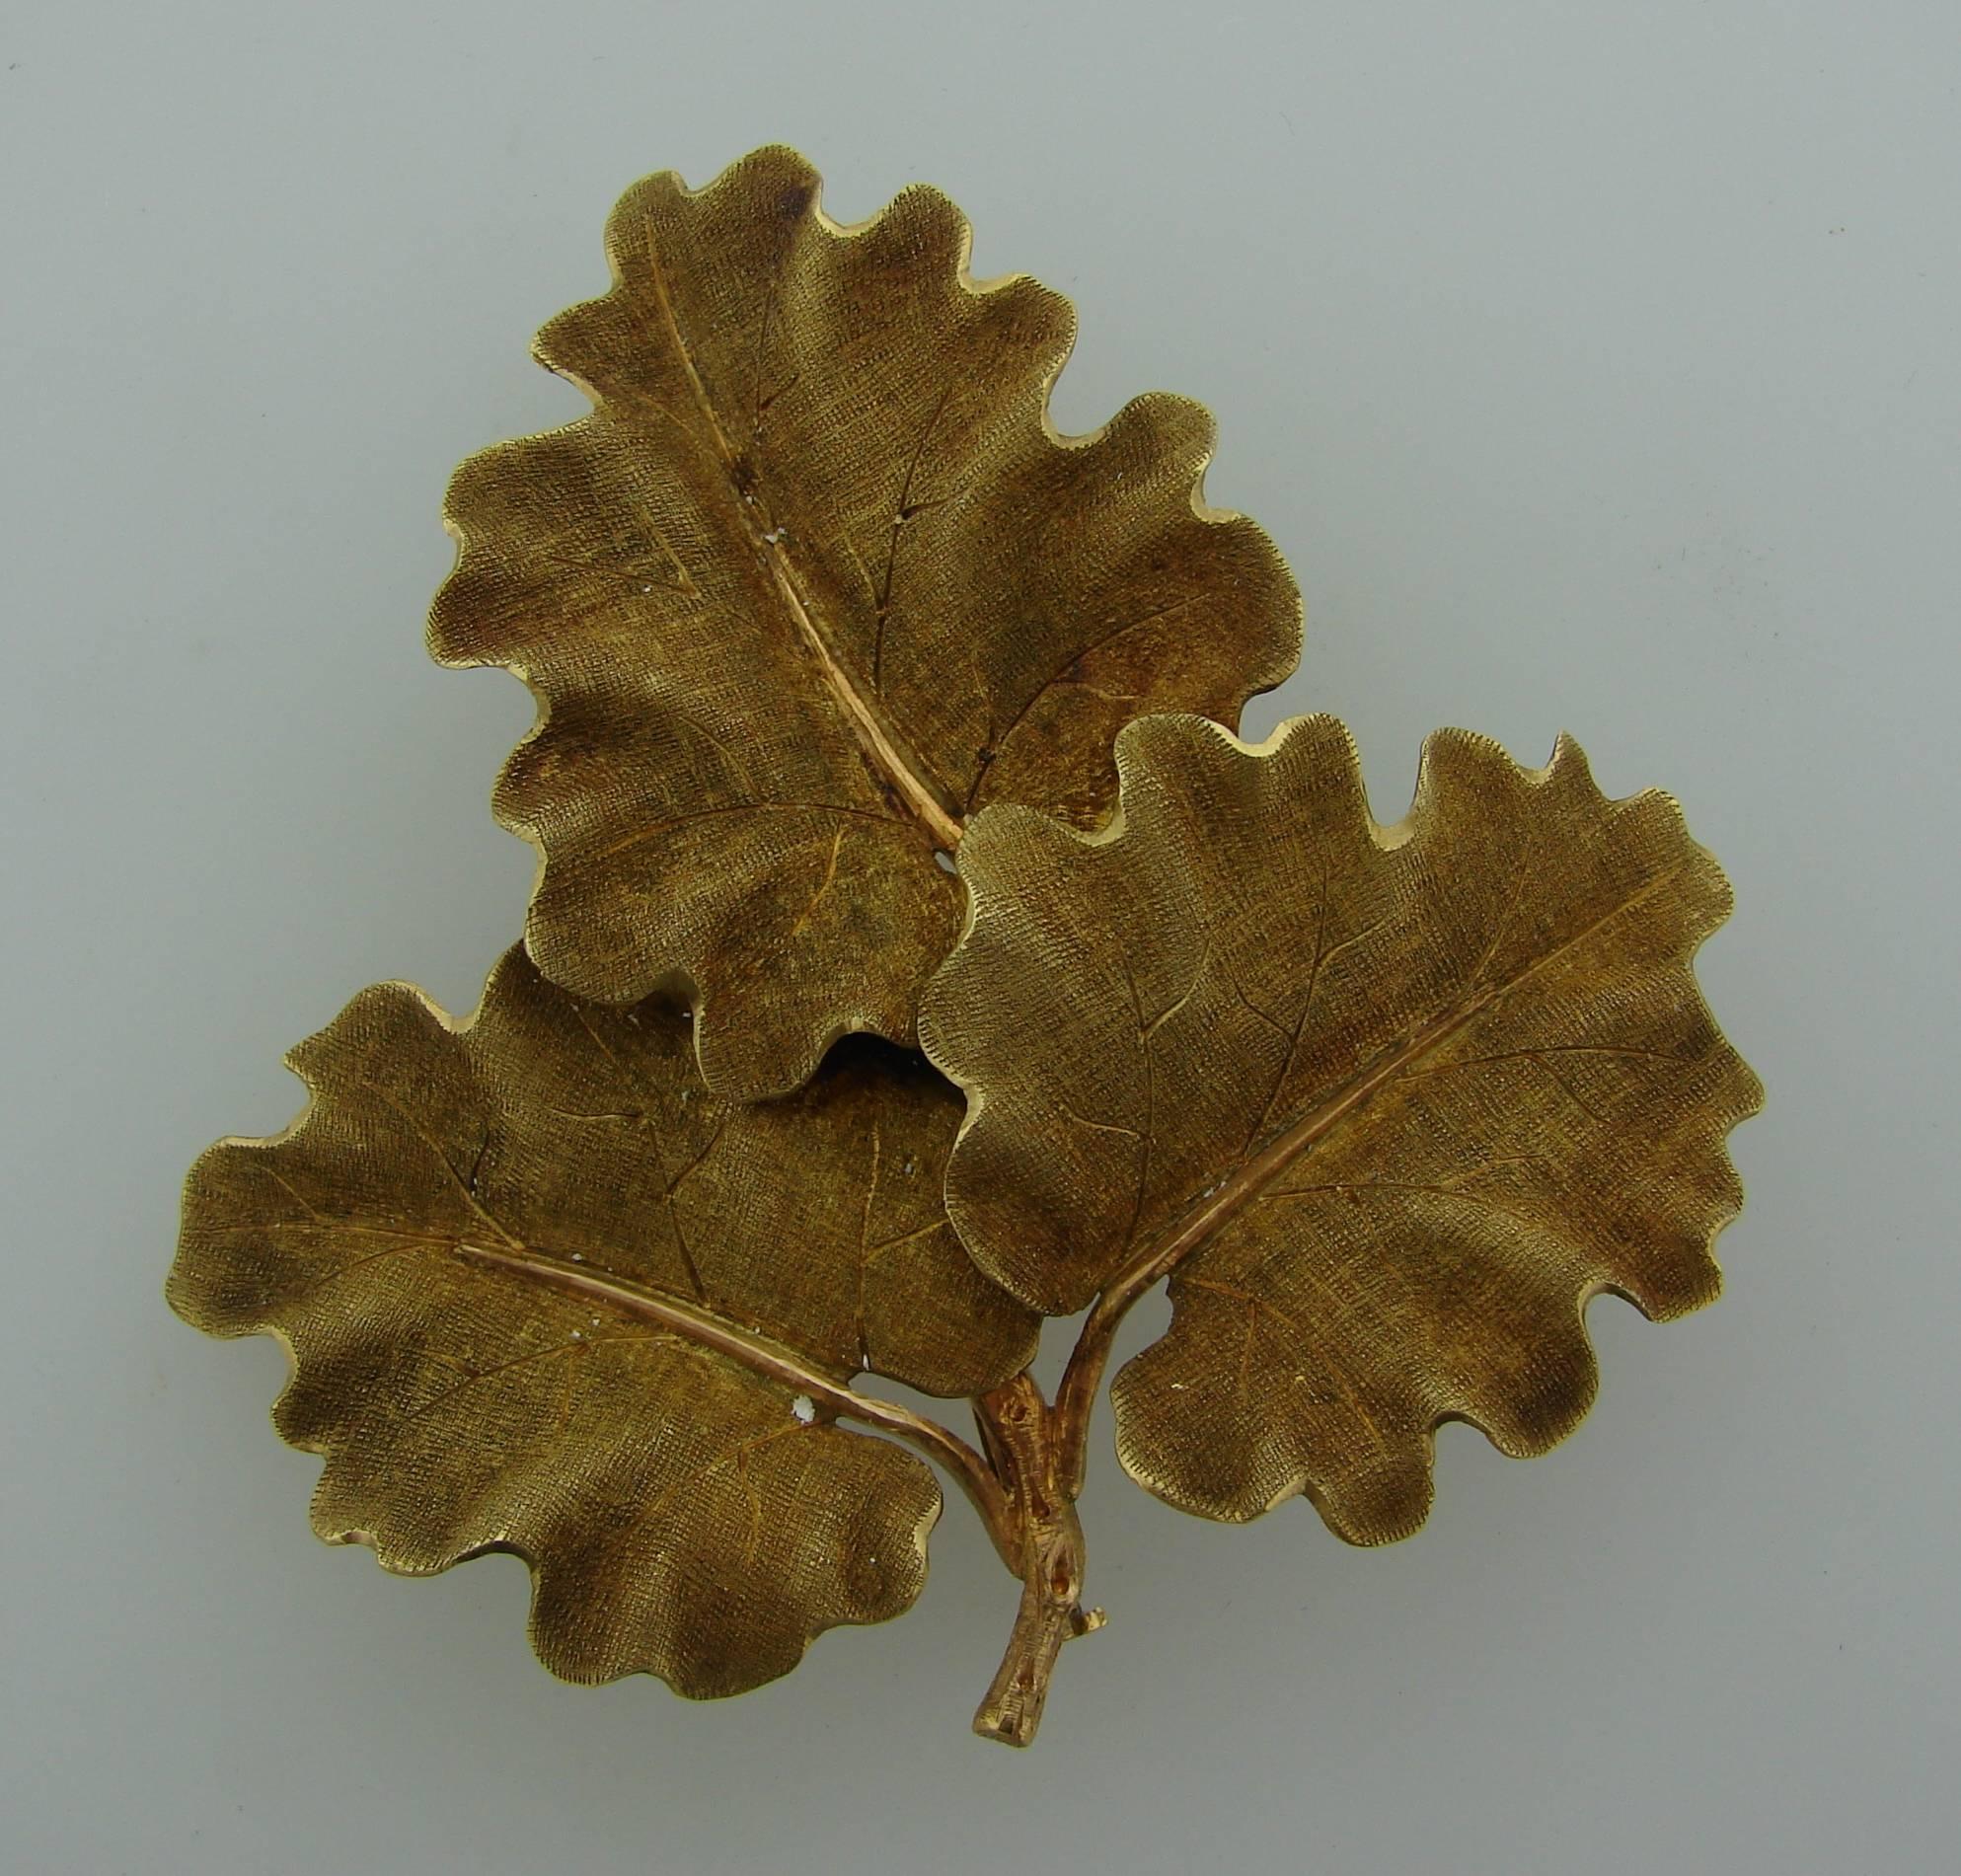 Chic lovely Oak leaves clip created by Mario Buccellati in Italy in the 1950's. It makes a tasteful accent to any outfit. 
The pin is made of 18 karat (stamped) yellow gold.
It is stamped with Mario Buccellati maker's mark, country of manufacture